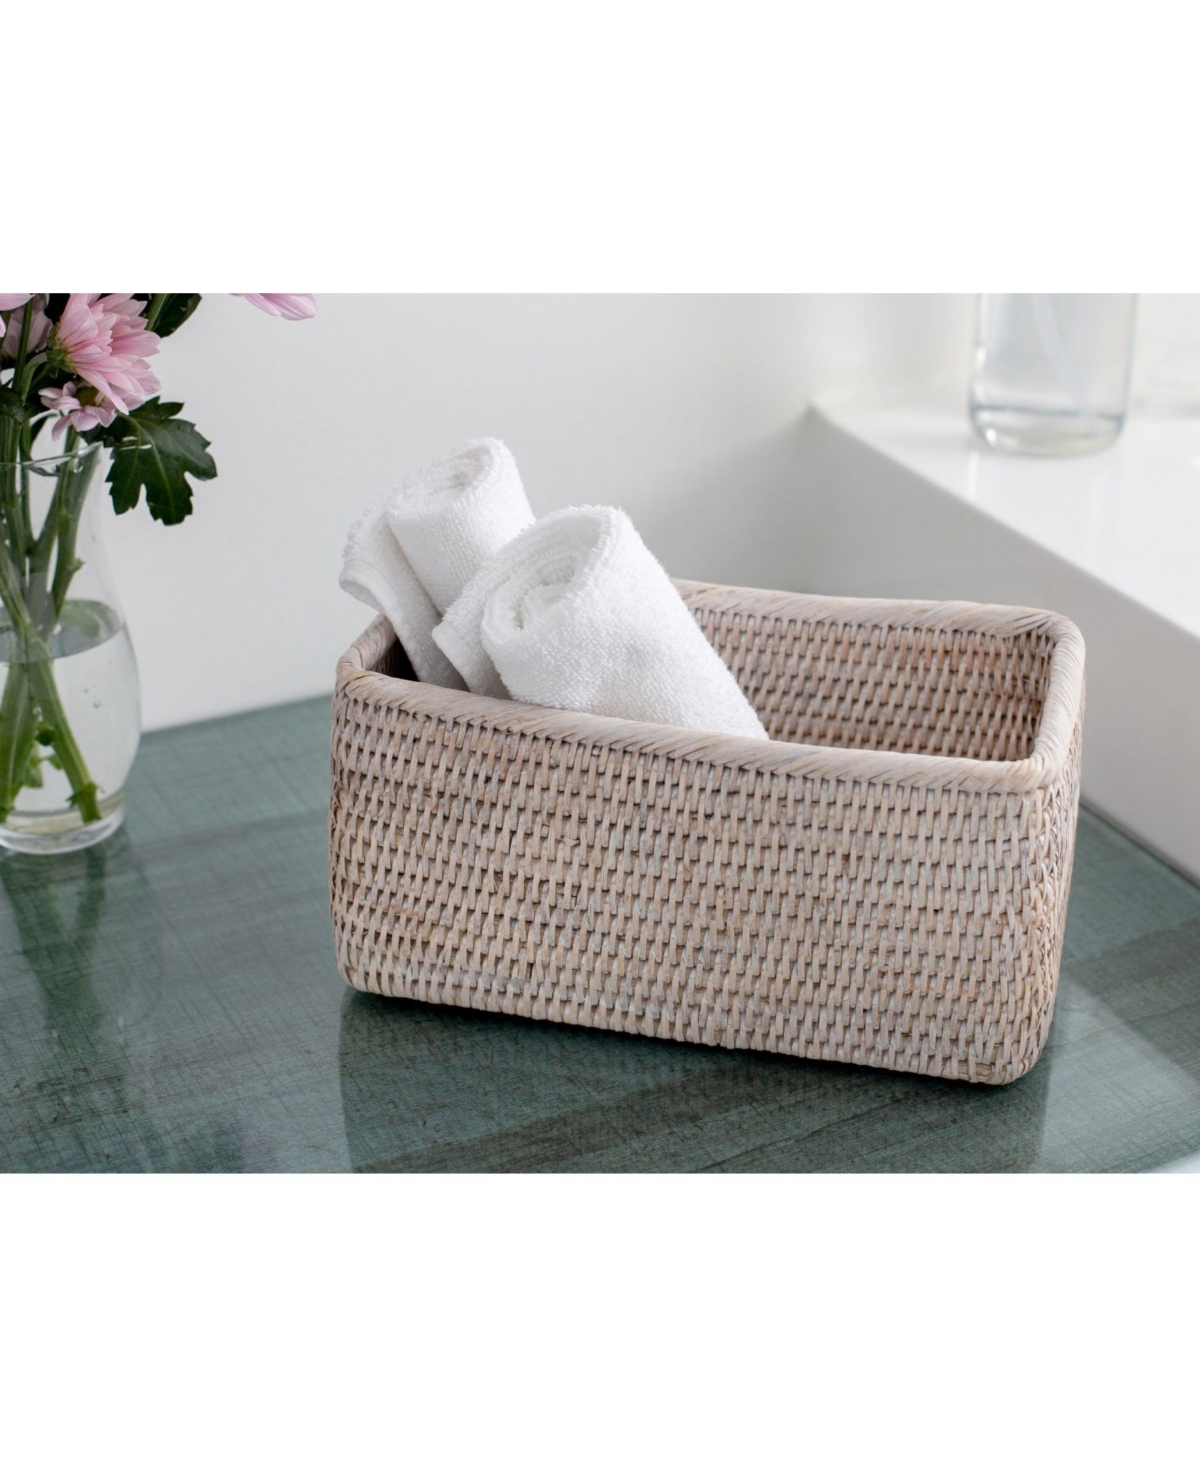 Shop Artifacts Trading Company Artifacts Rattan Rectangular Basket In Off-white